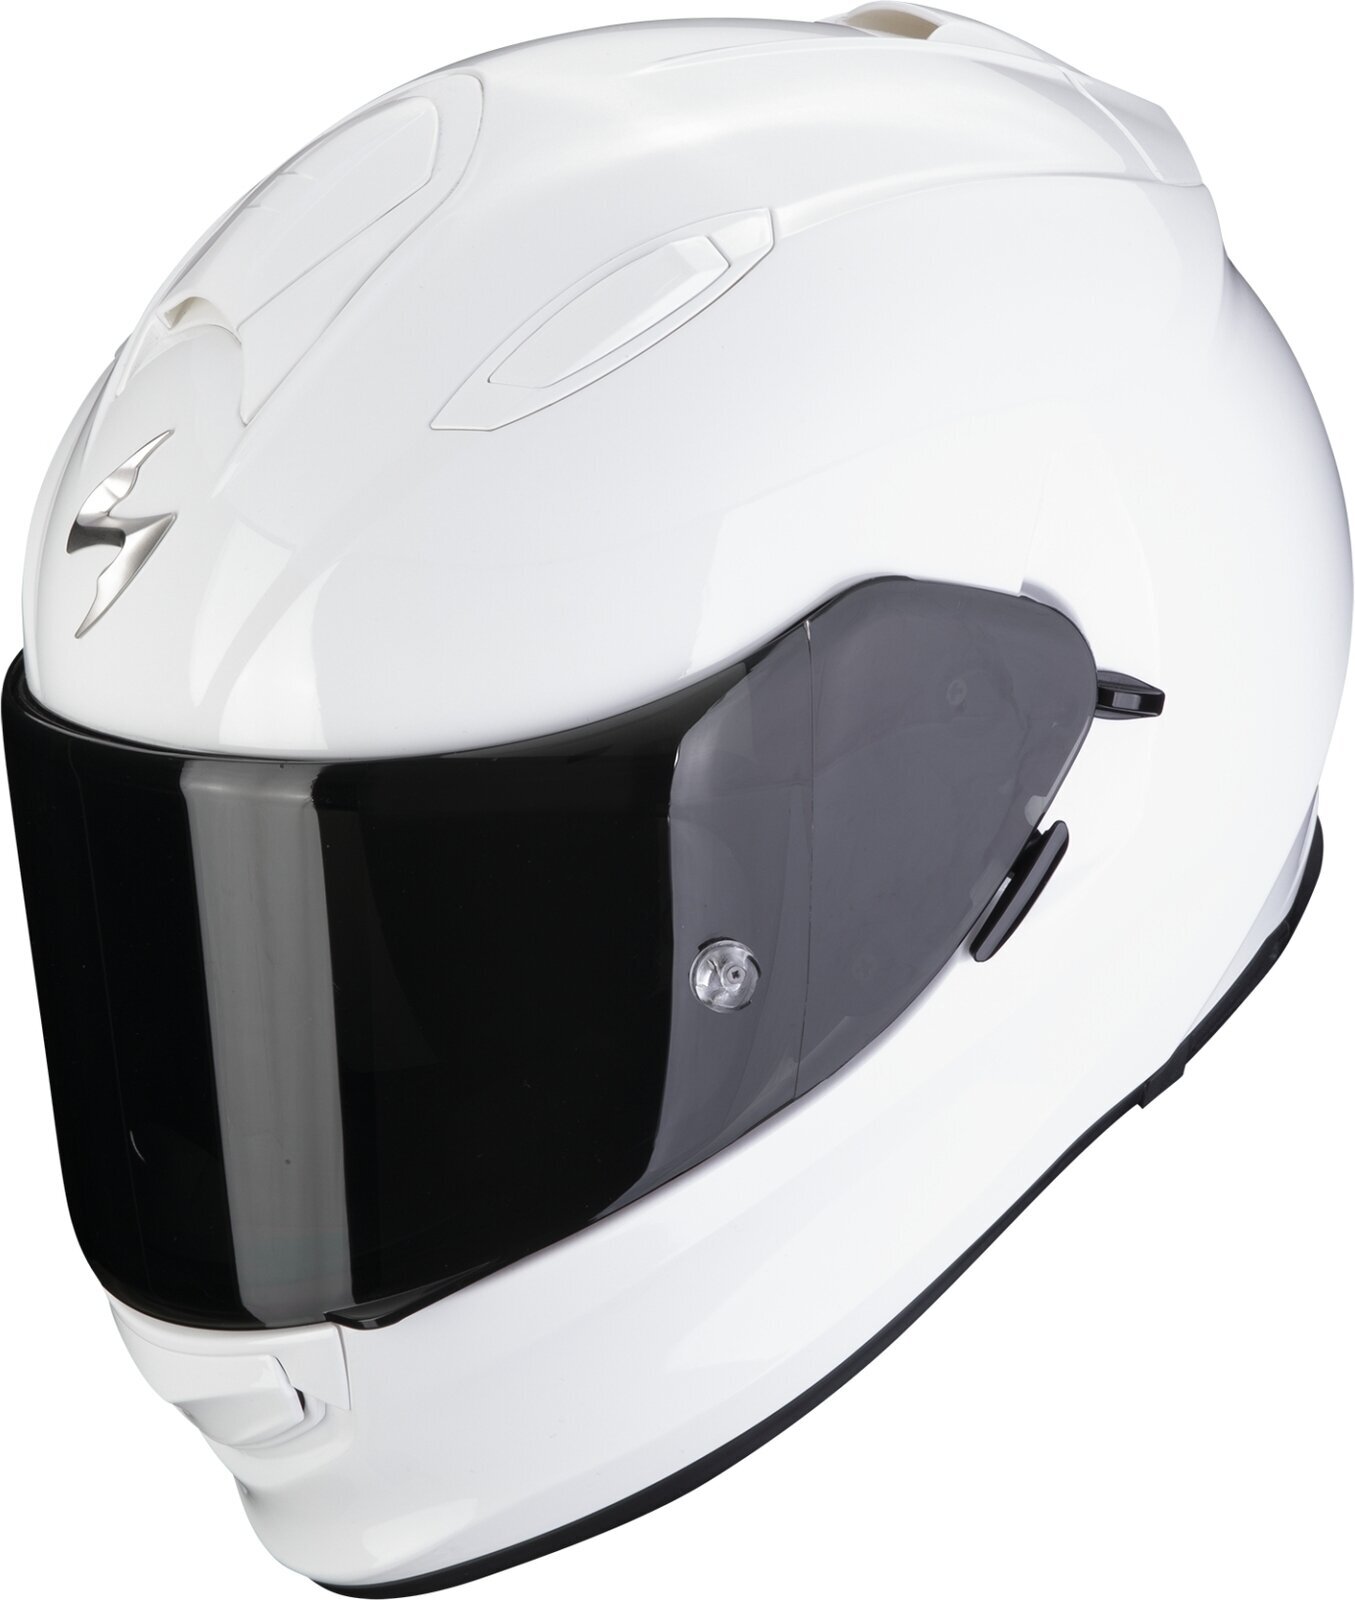 Helm Scorpion EXO 491 SOLID White S Helm